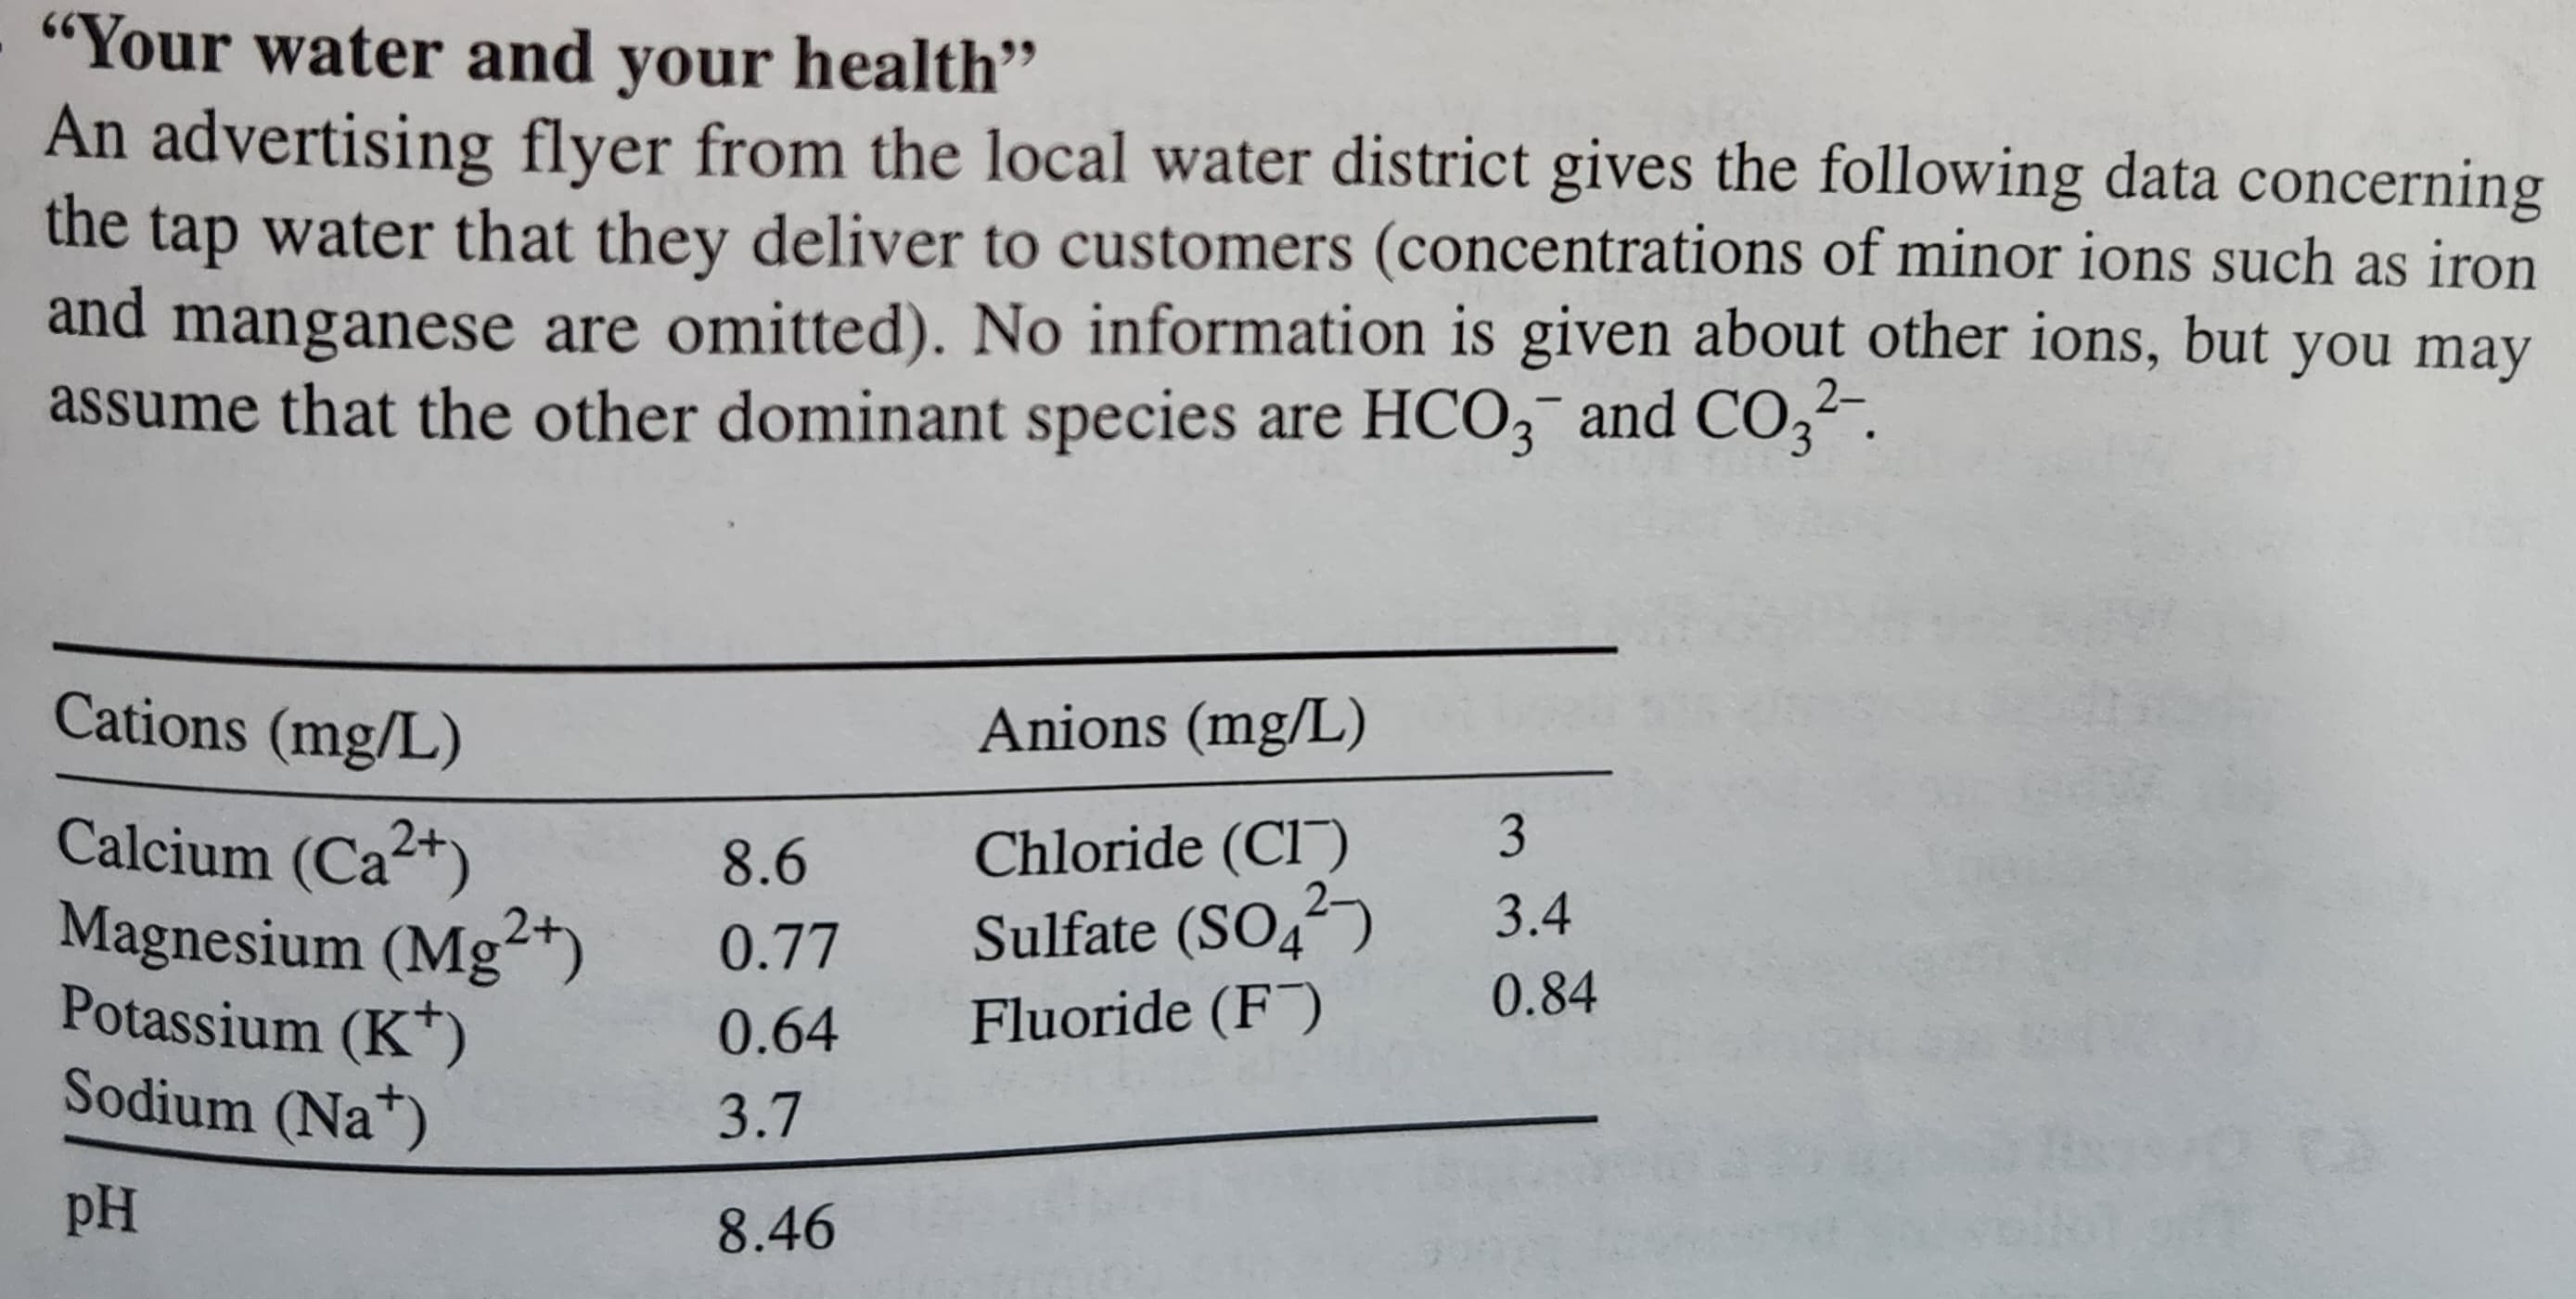 "Your water and your health"
An advertising flyer from the local water district gives the following data concerning
the tap water that they deliver to customers (concentrations of minor ions such as iron
and manganese are omitted). No information is given about other ions, but you may
assume that the other dominant species are HCO3 and CO3²-.
2-
Cations (mg/L)
Calcium (Ca2+)
Magnesium (Mg2+)
Potassium (K¹)
Sodium (Na+)
pH
8.6
0.77
0.64
3.7
8.46
Anions (mg/L)
Chloride (CI)
Sulfate (SO²)
Fluoride (F)
3
3.4
0.84